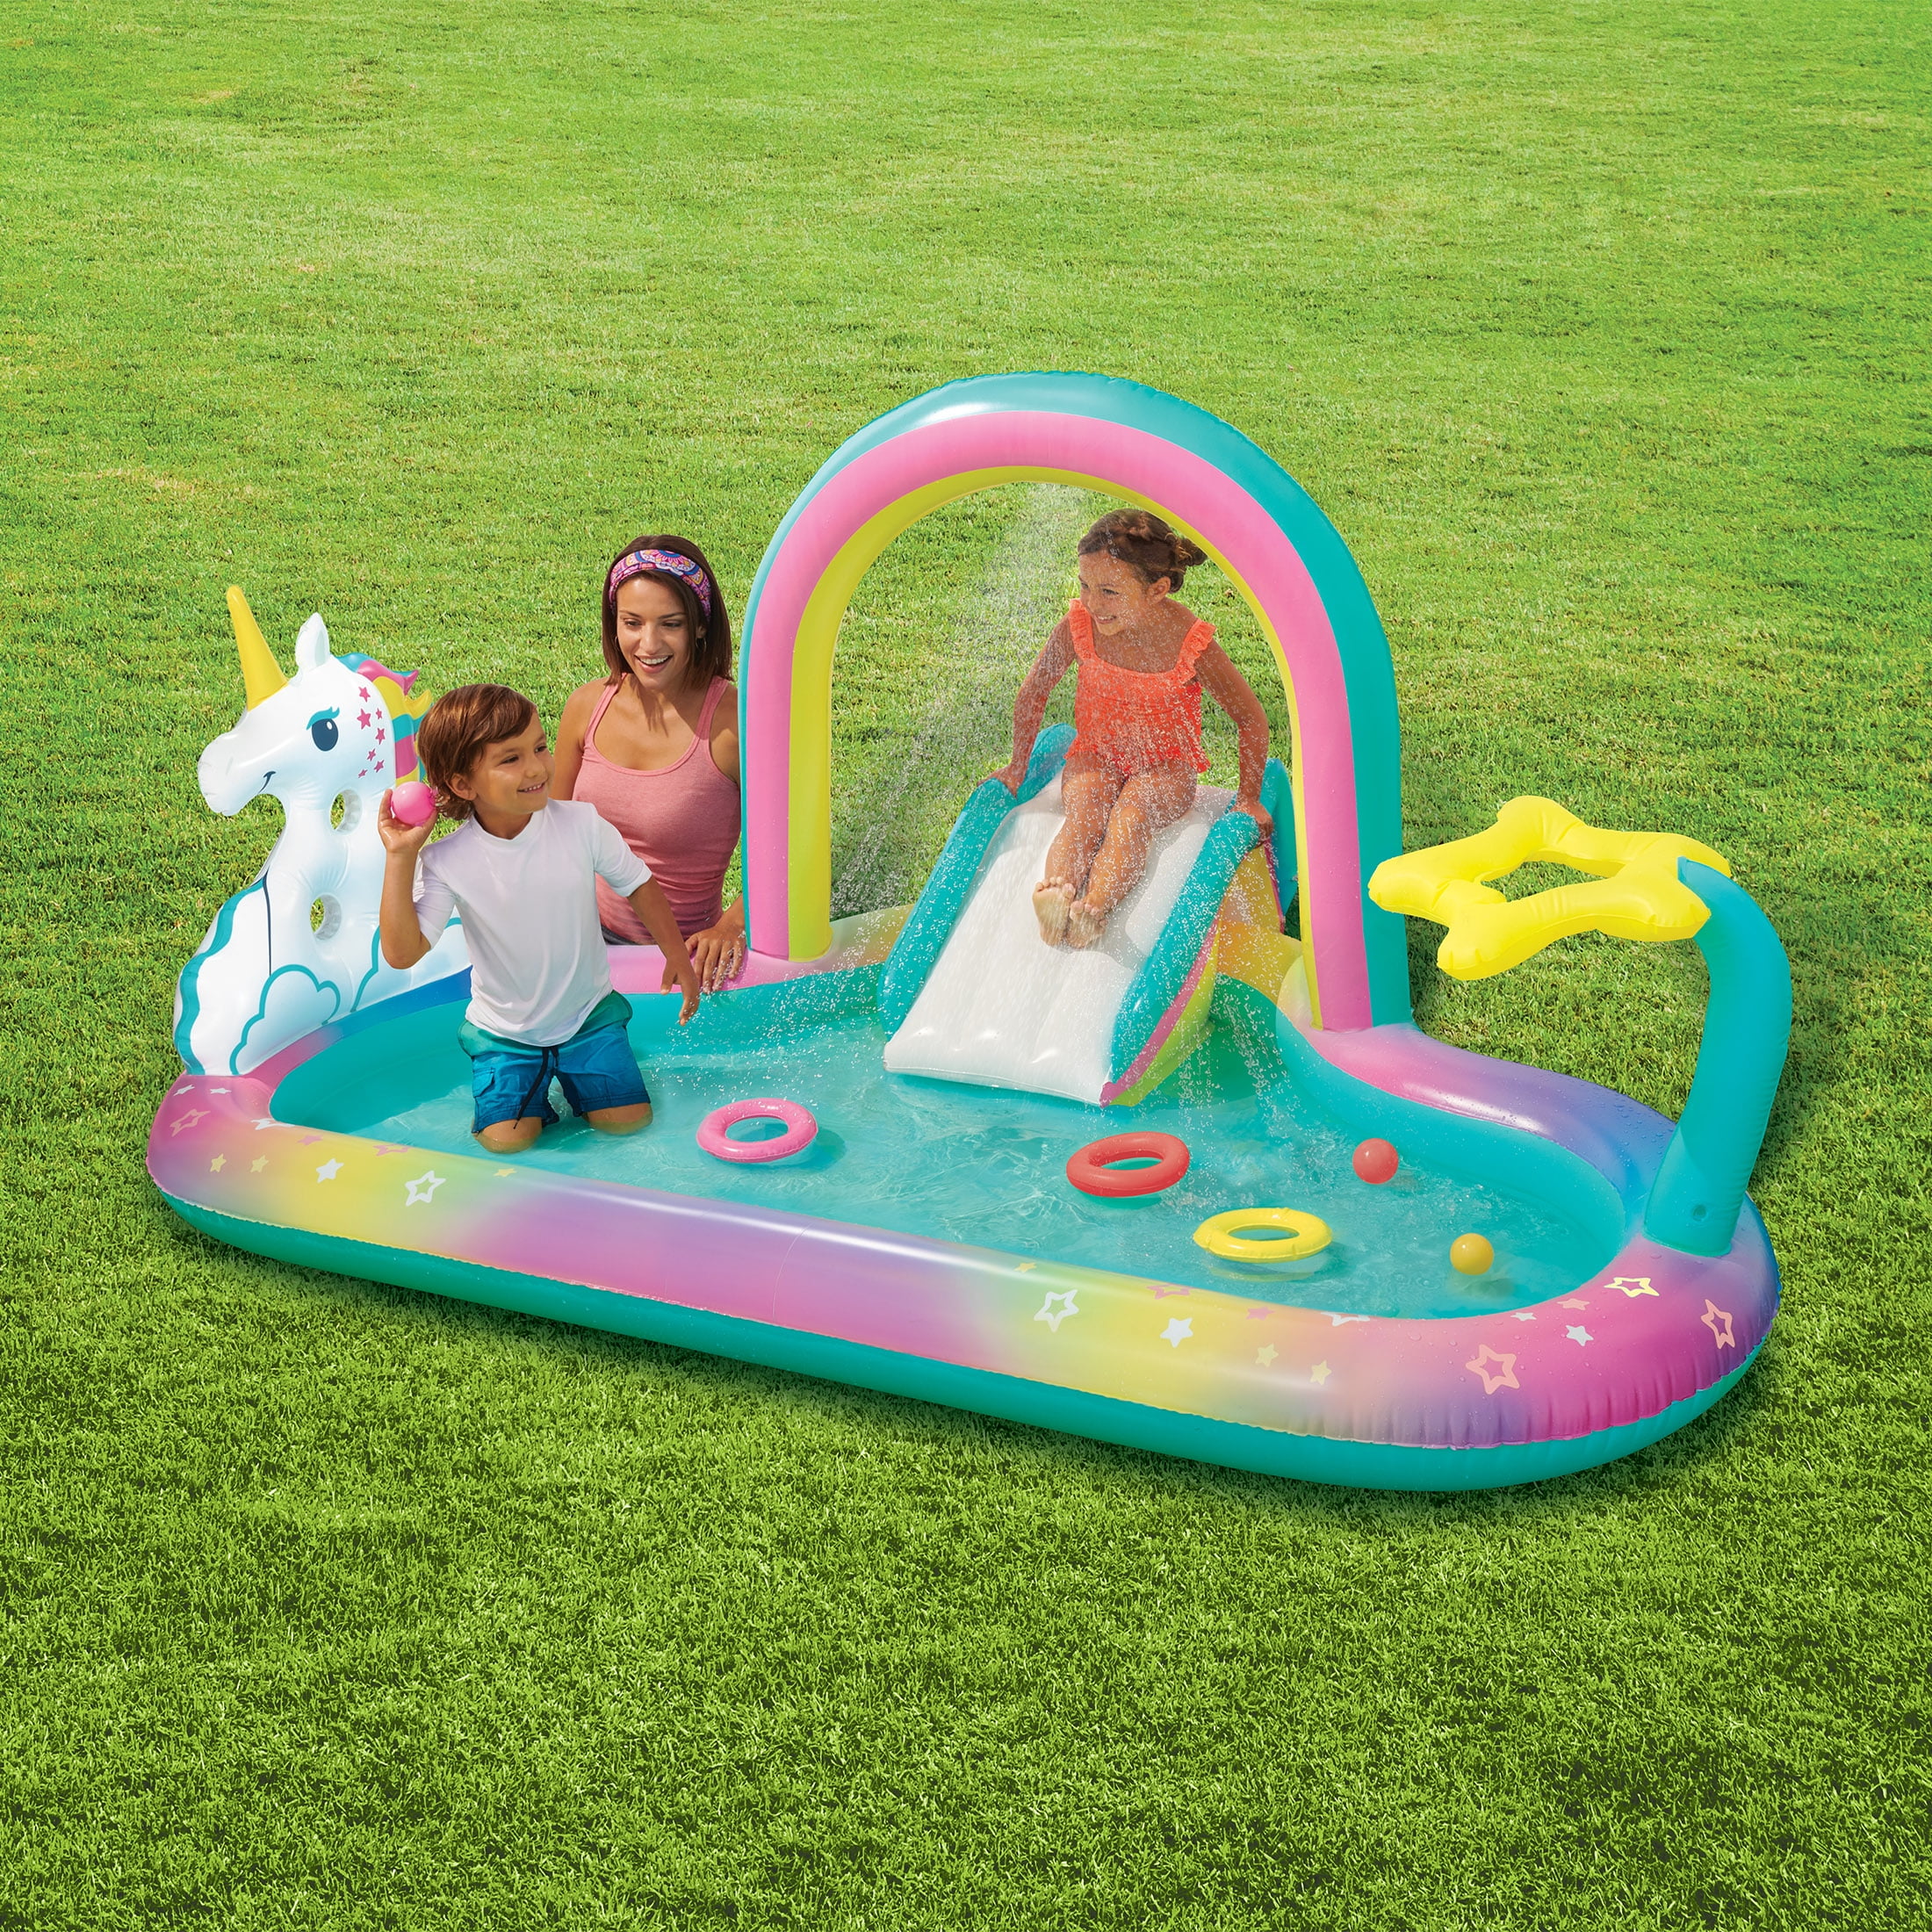 Play Day Round Inflatable Rainbow Play Center, Ages 2 & Up, Unisex